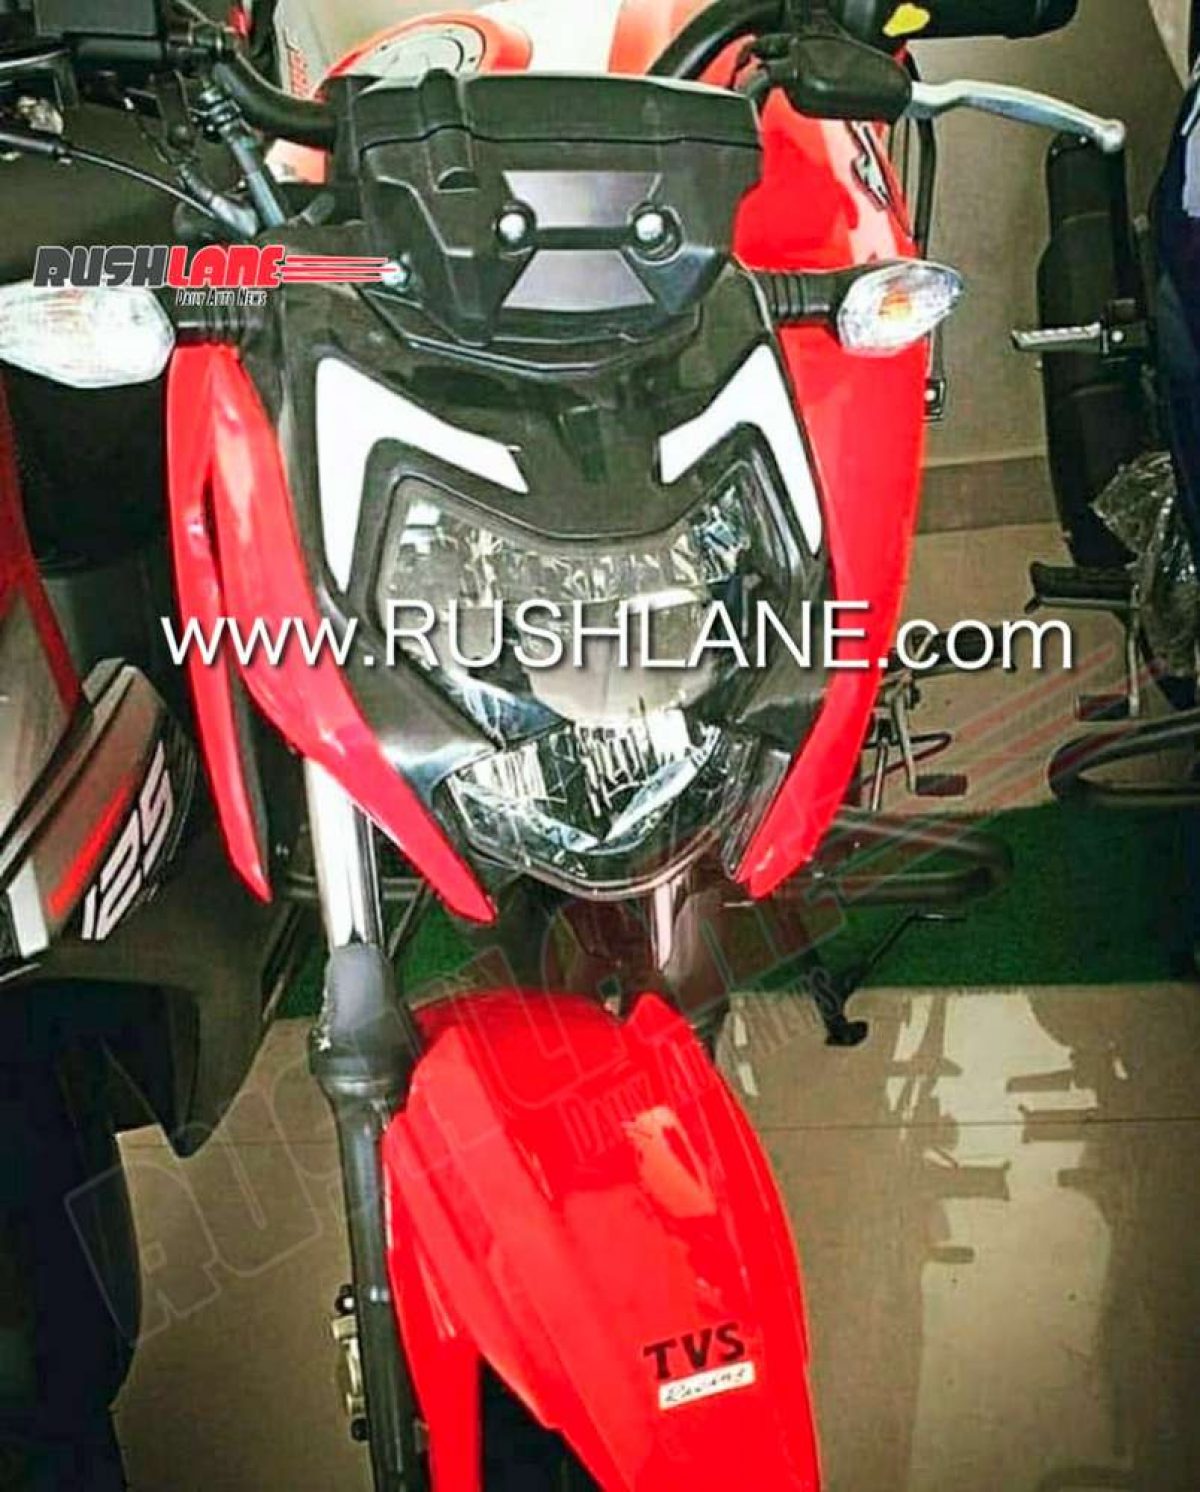 2019 Tvs Apache 160 Bs6 Spied Undisguised Ahead Of Launch